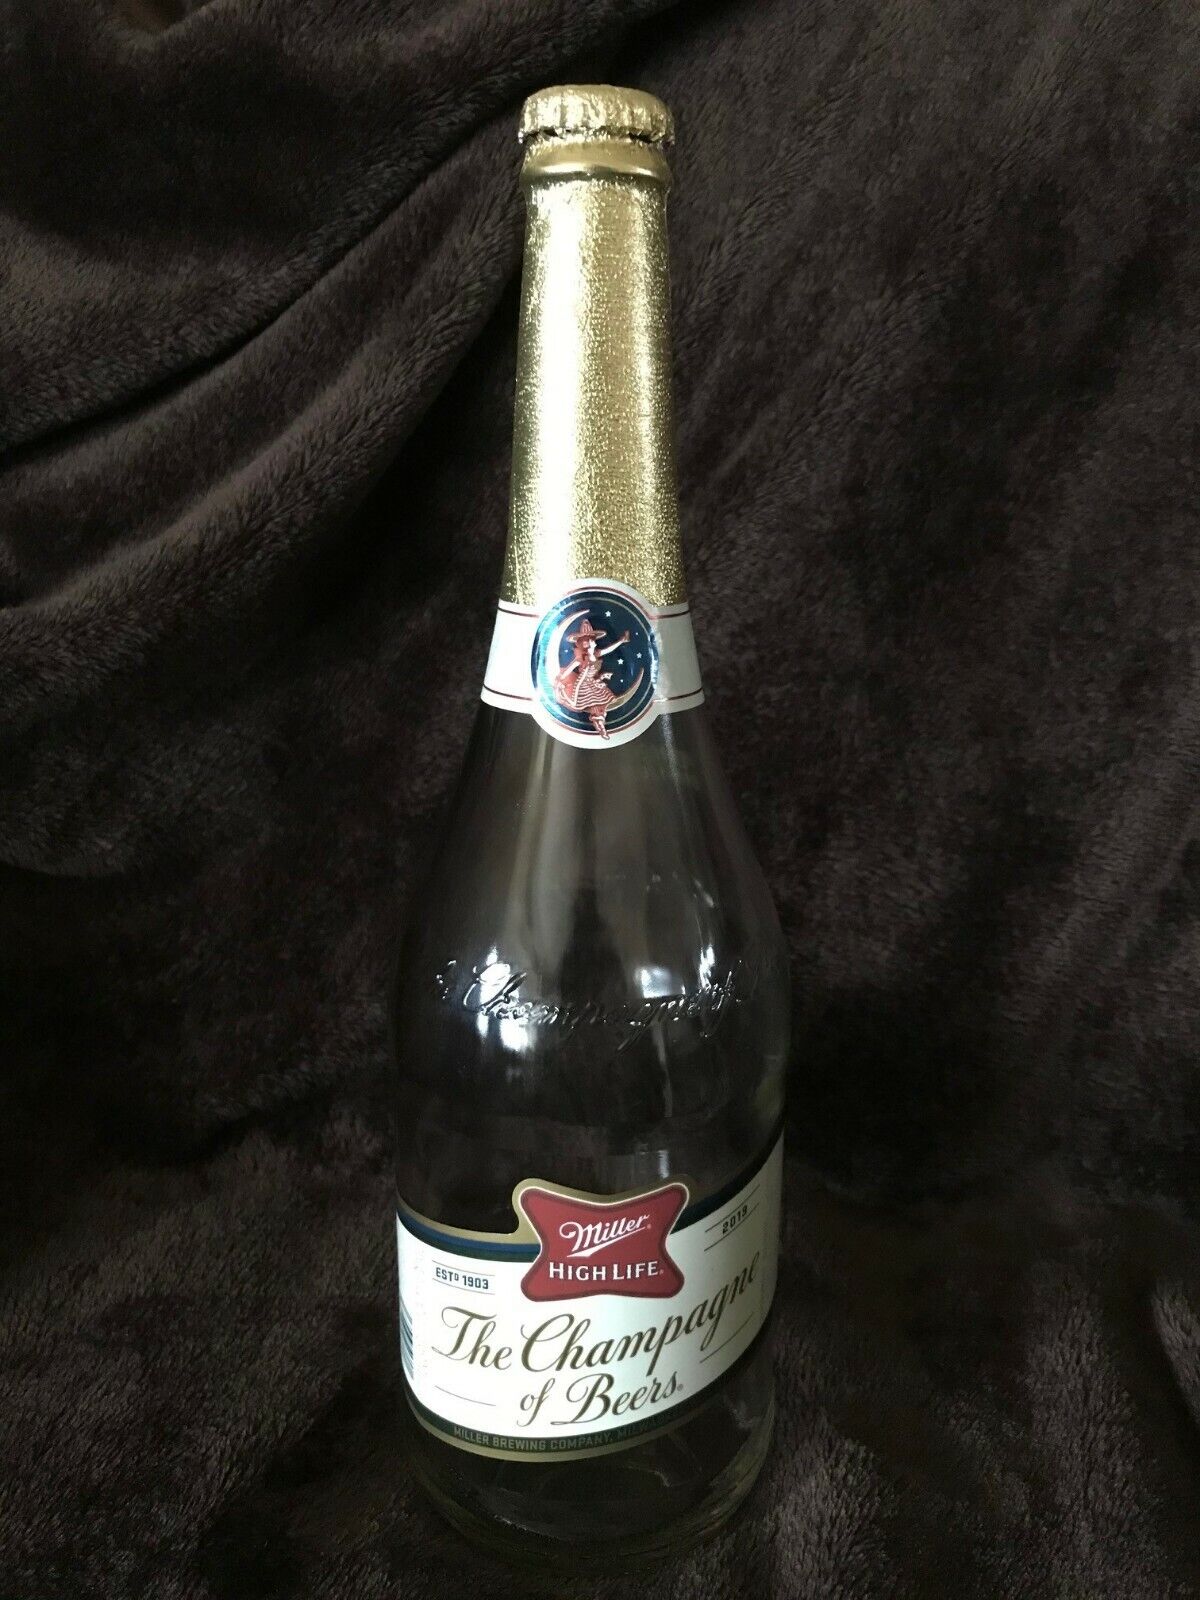 Miller High Life Champagne of Beers Beer Bottle 2019 Edition Decoration 1 Pint 